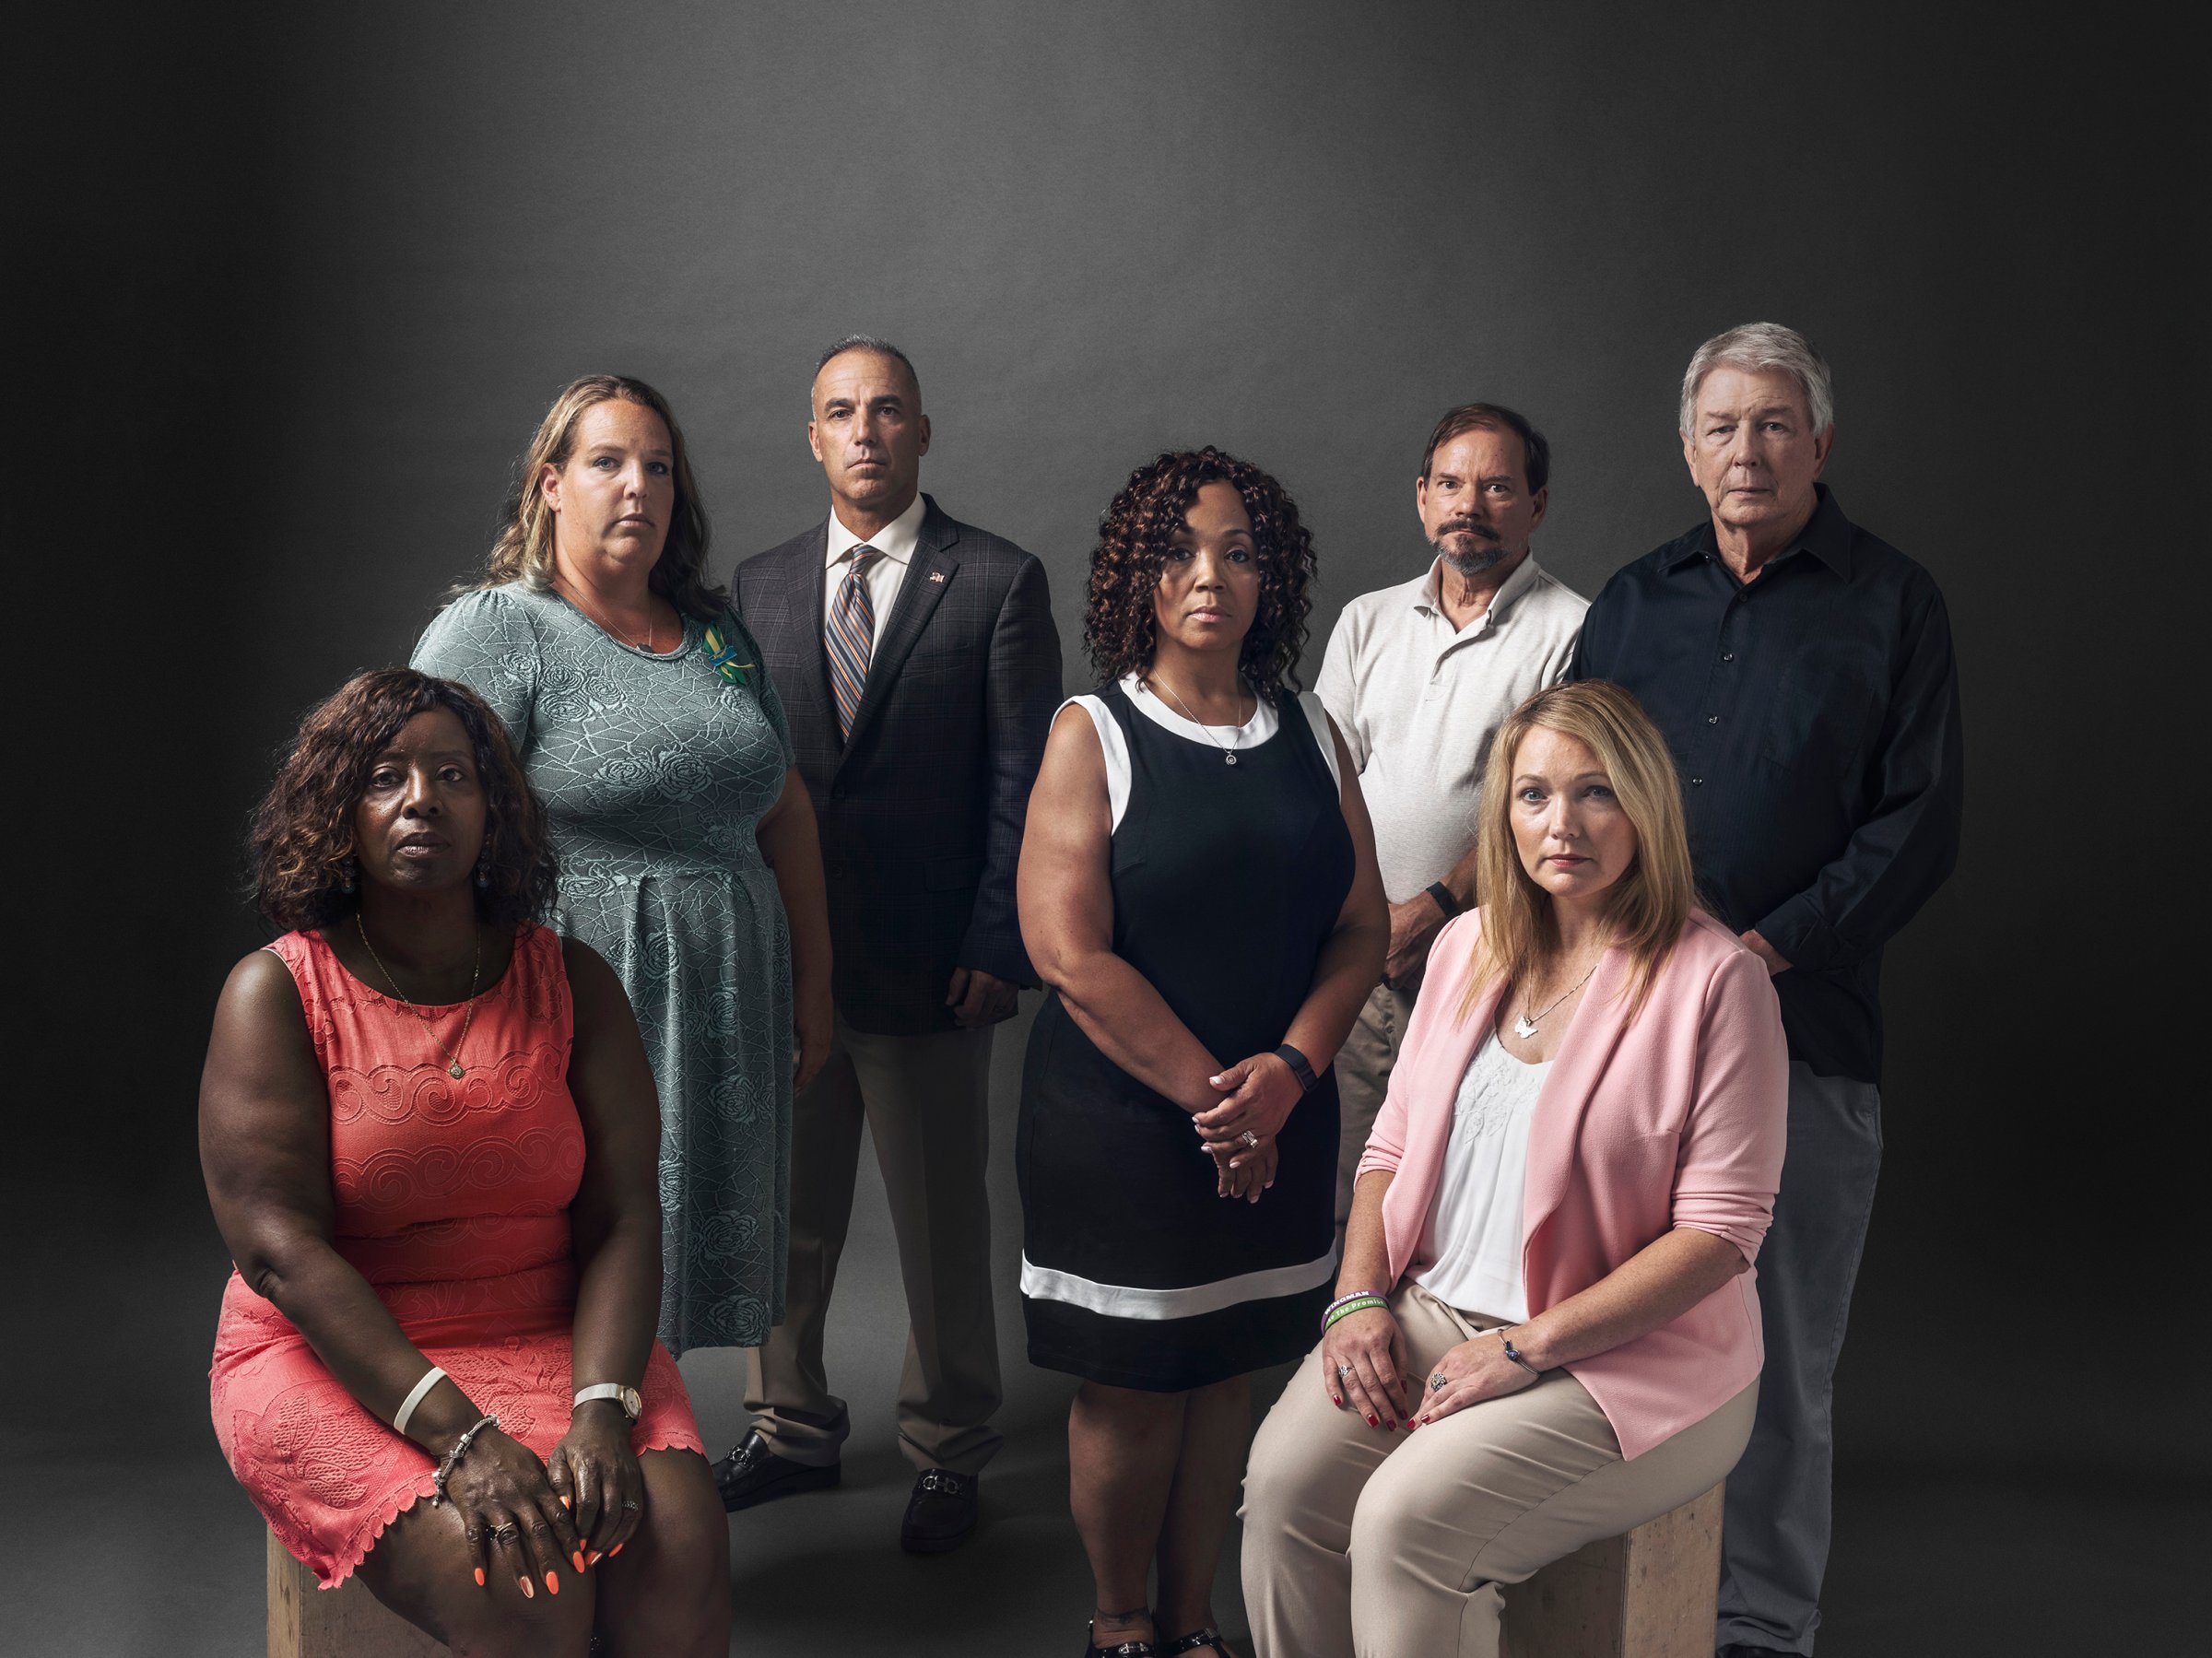 Seven parents of seven dead students. From left: Pamela Wright- Young, Melissa Willey, Andrew Pollack, Darshell Scott, Tom Mauser, Nicole Hockley and Darrell Scott